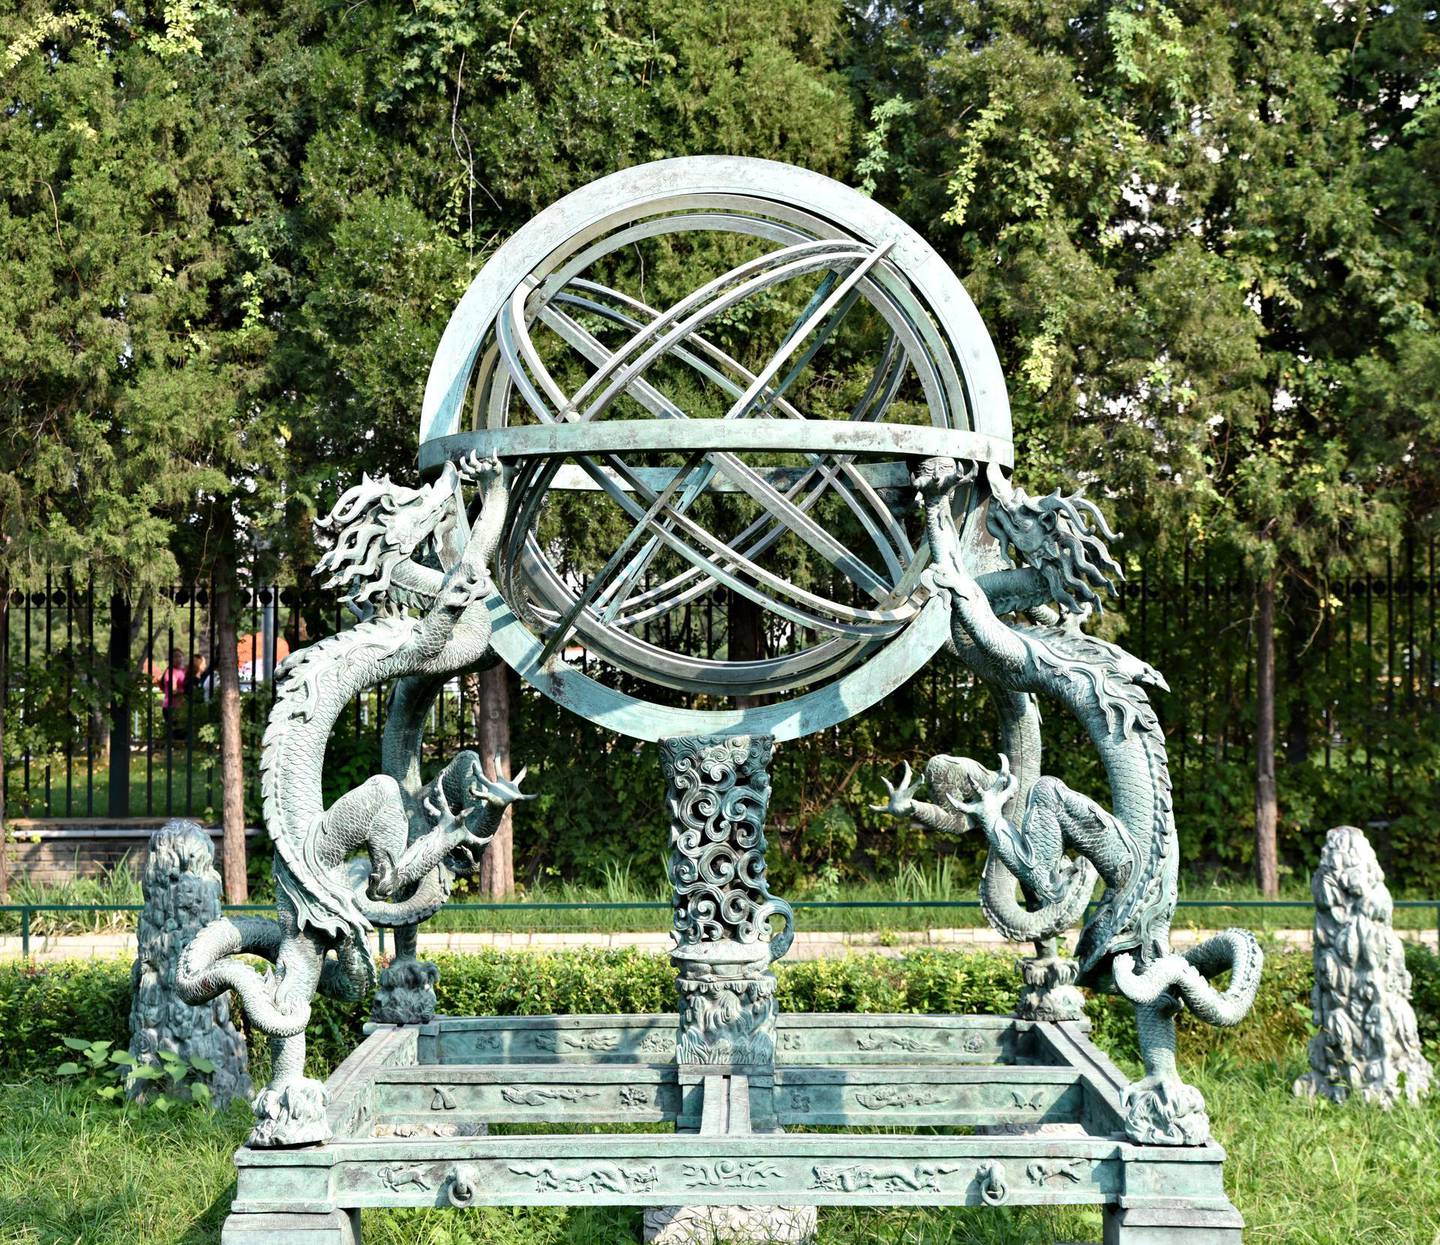  An armillary sphere decorated by Chinese dragons on the grounds of the former observatory. Courtesy Ronan O'Connell